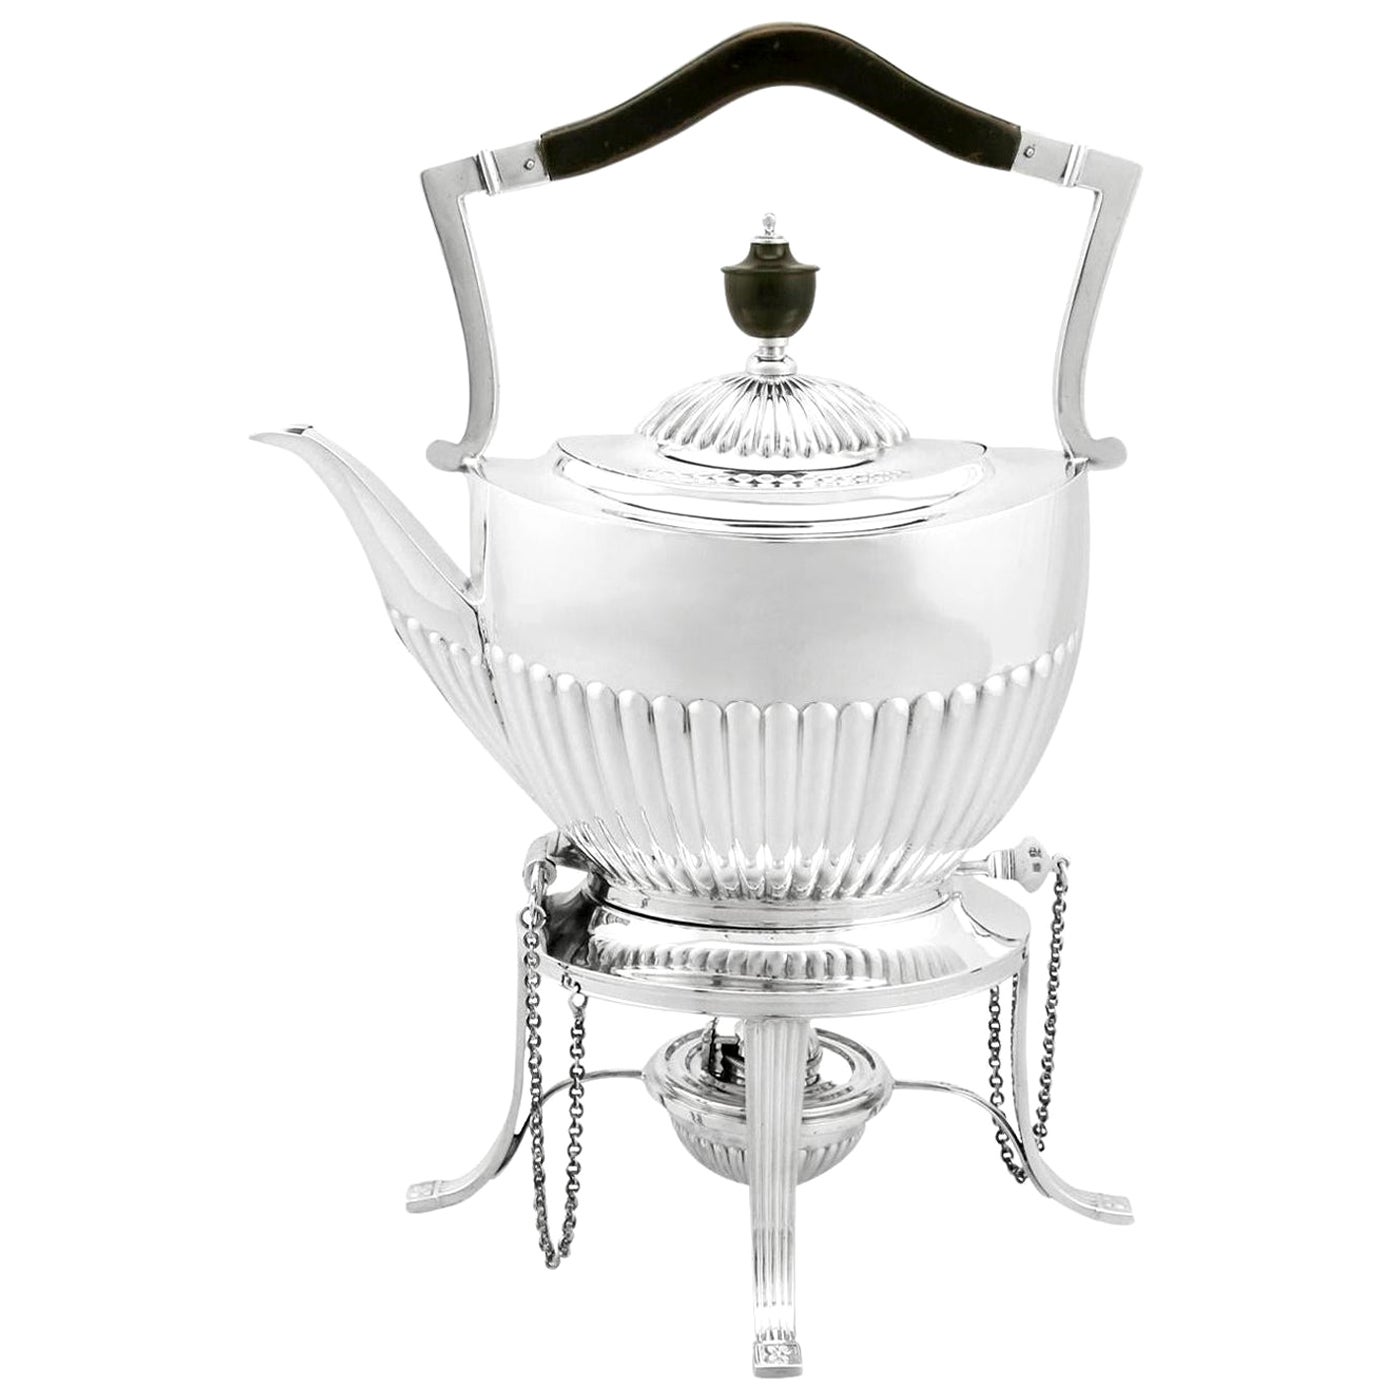 How do I tell if a teapot is silver or silver plated?